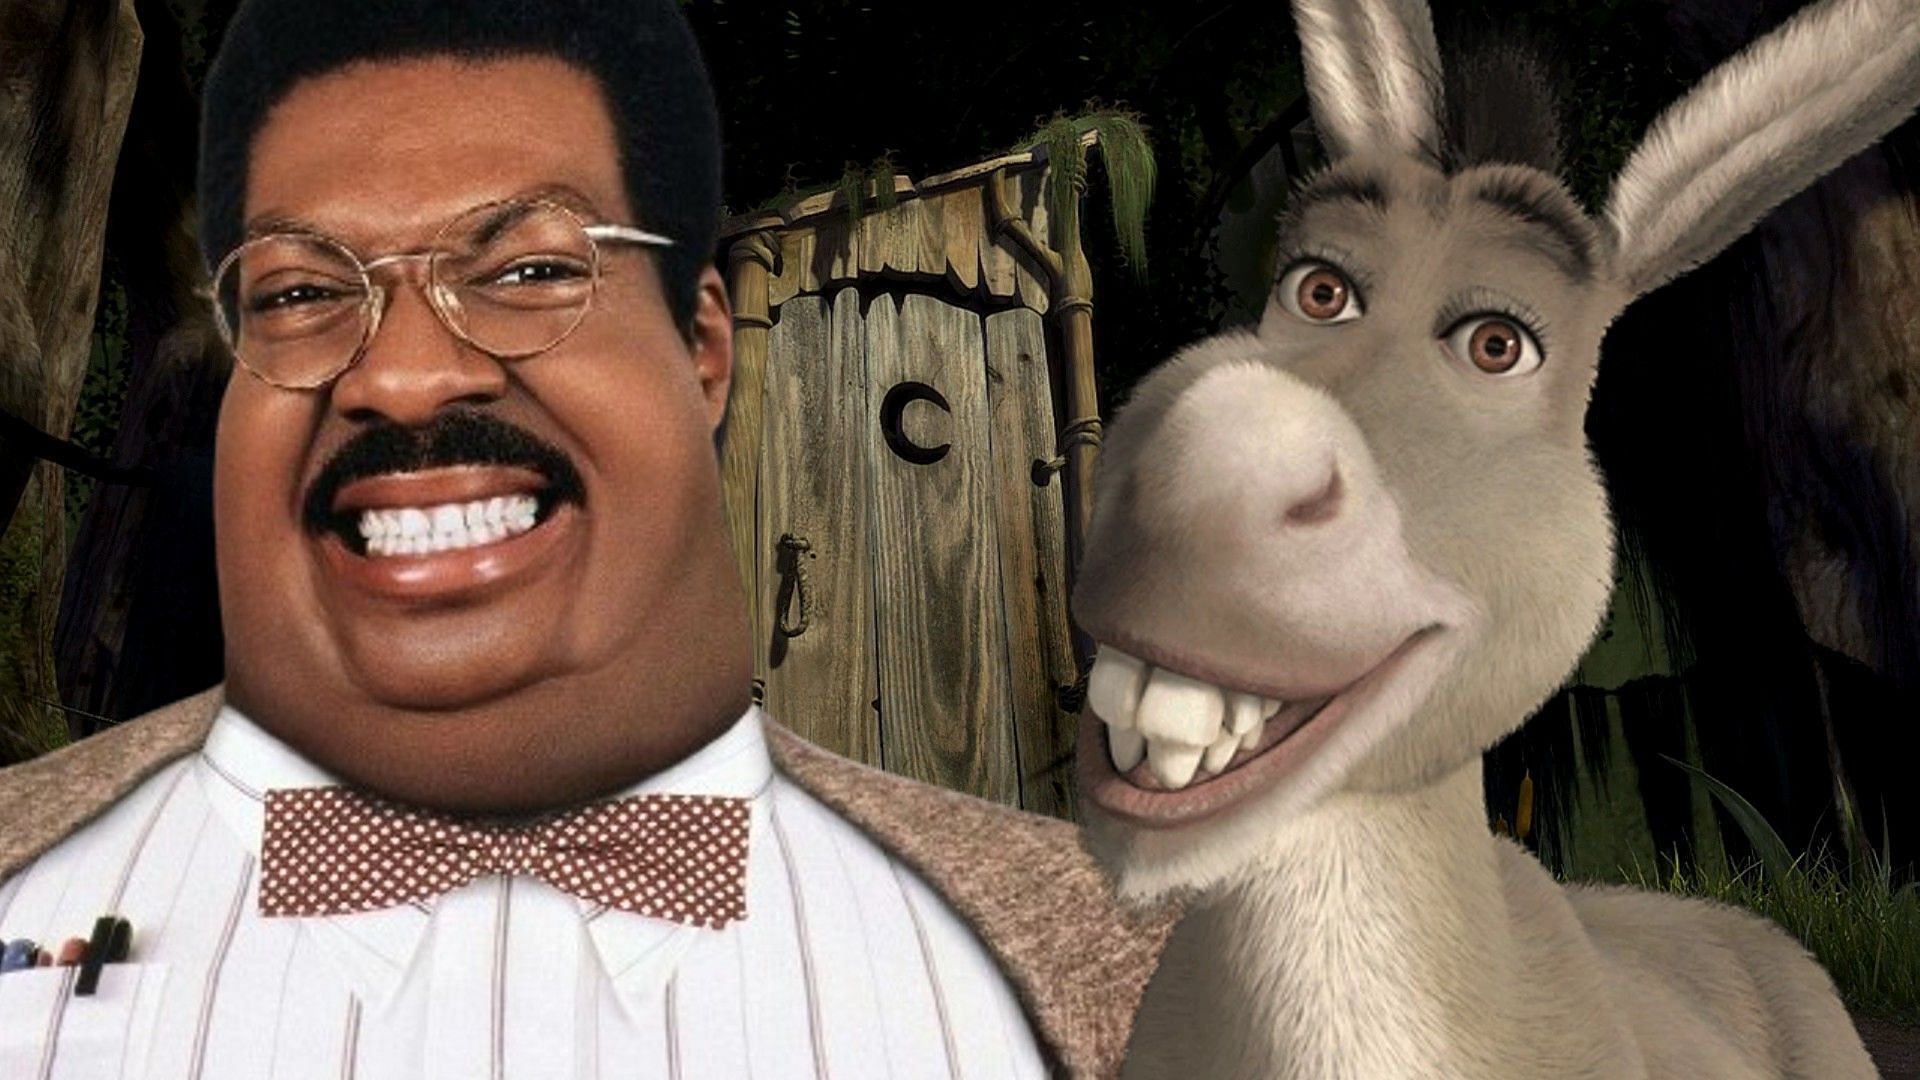 Eddie Murphy reveals early production details for Shrek 5 and a new Donkey spinoff (Image via Netflix)